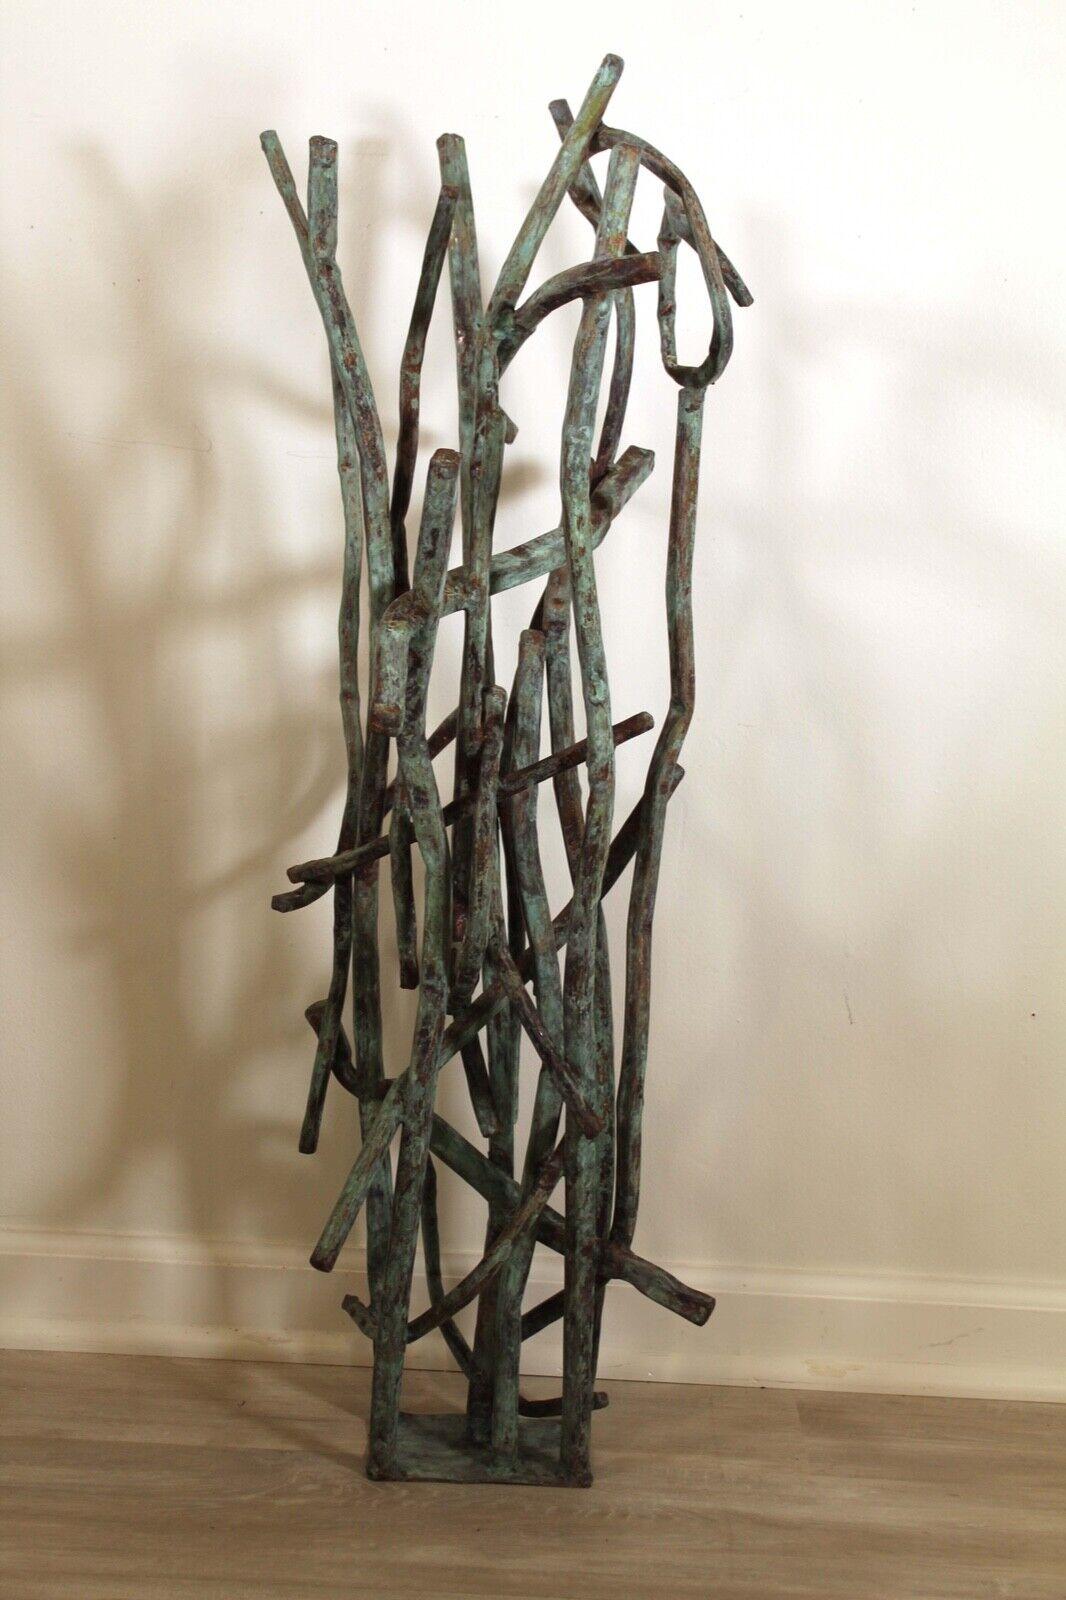 This stellar copper abstract sculpture created by Robert Hansen in 2022. In very good condition. Dimensions: 15